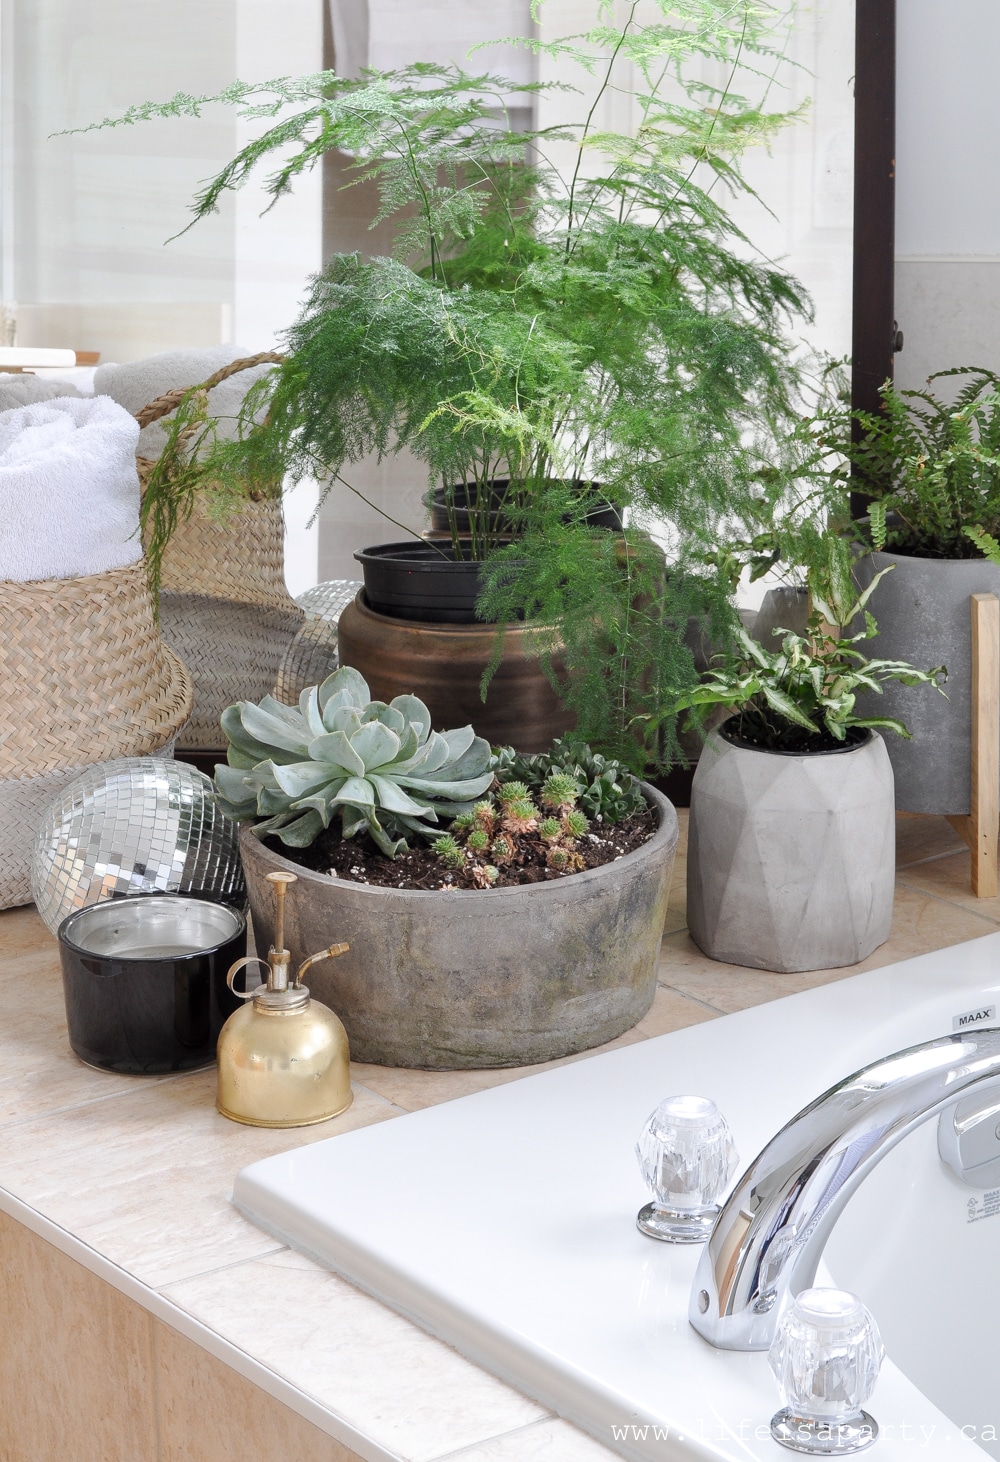 Modern Boho Bathroom Refresh -fresh white paint, a DIY tub tray, beads, candles, and lots and lots of plants turned this bathroom from boring to boho in just a few days.